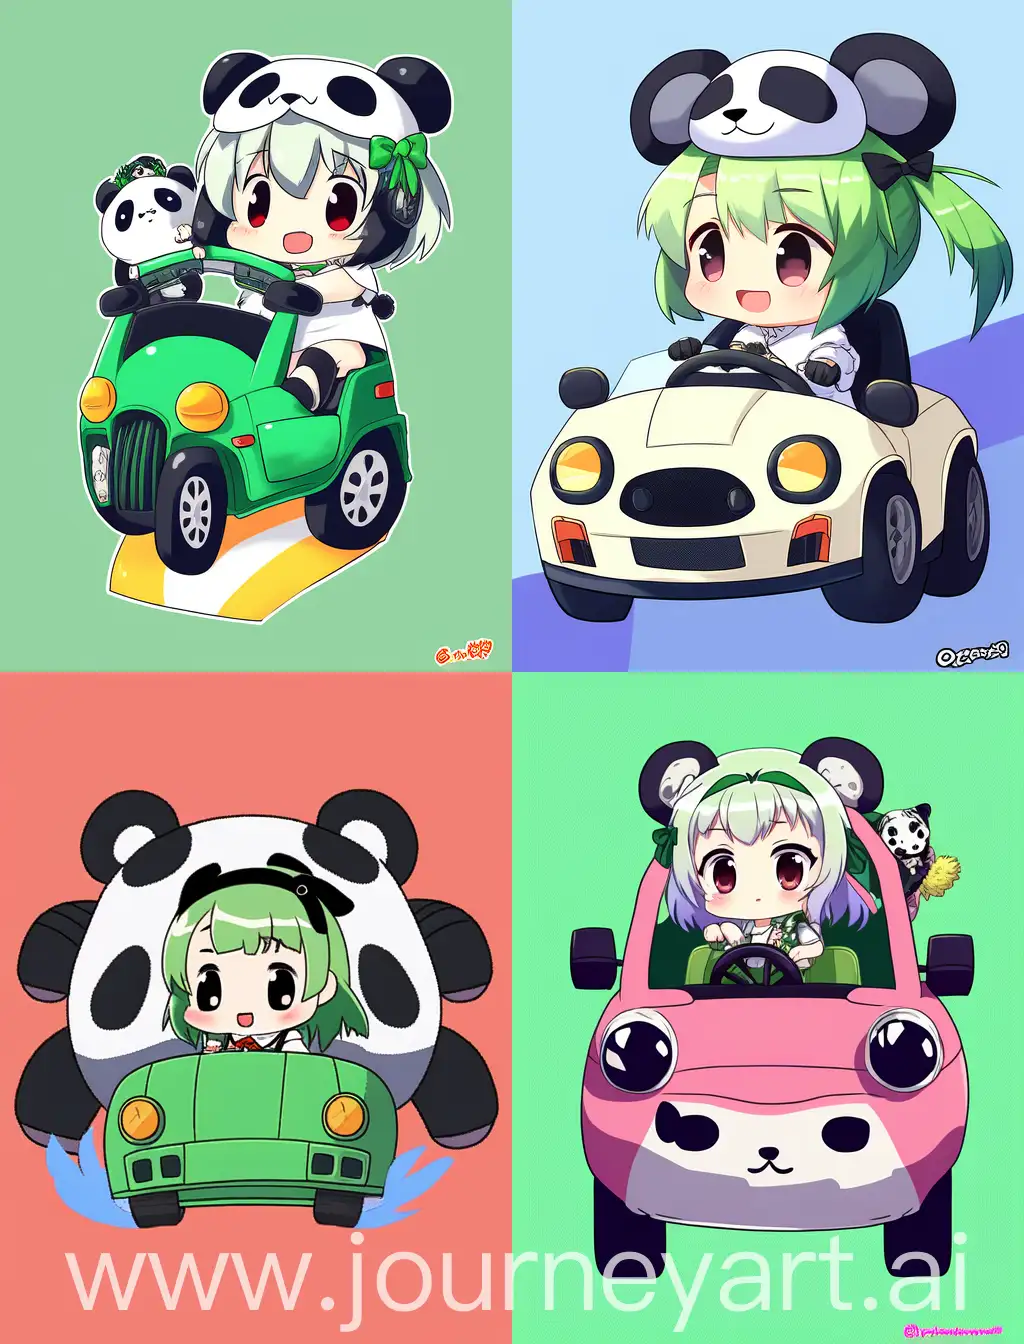 chibi girl driving a car with a panda, green solid background